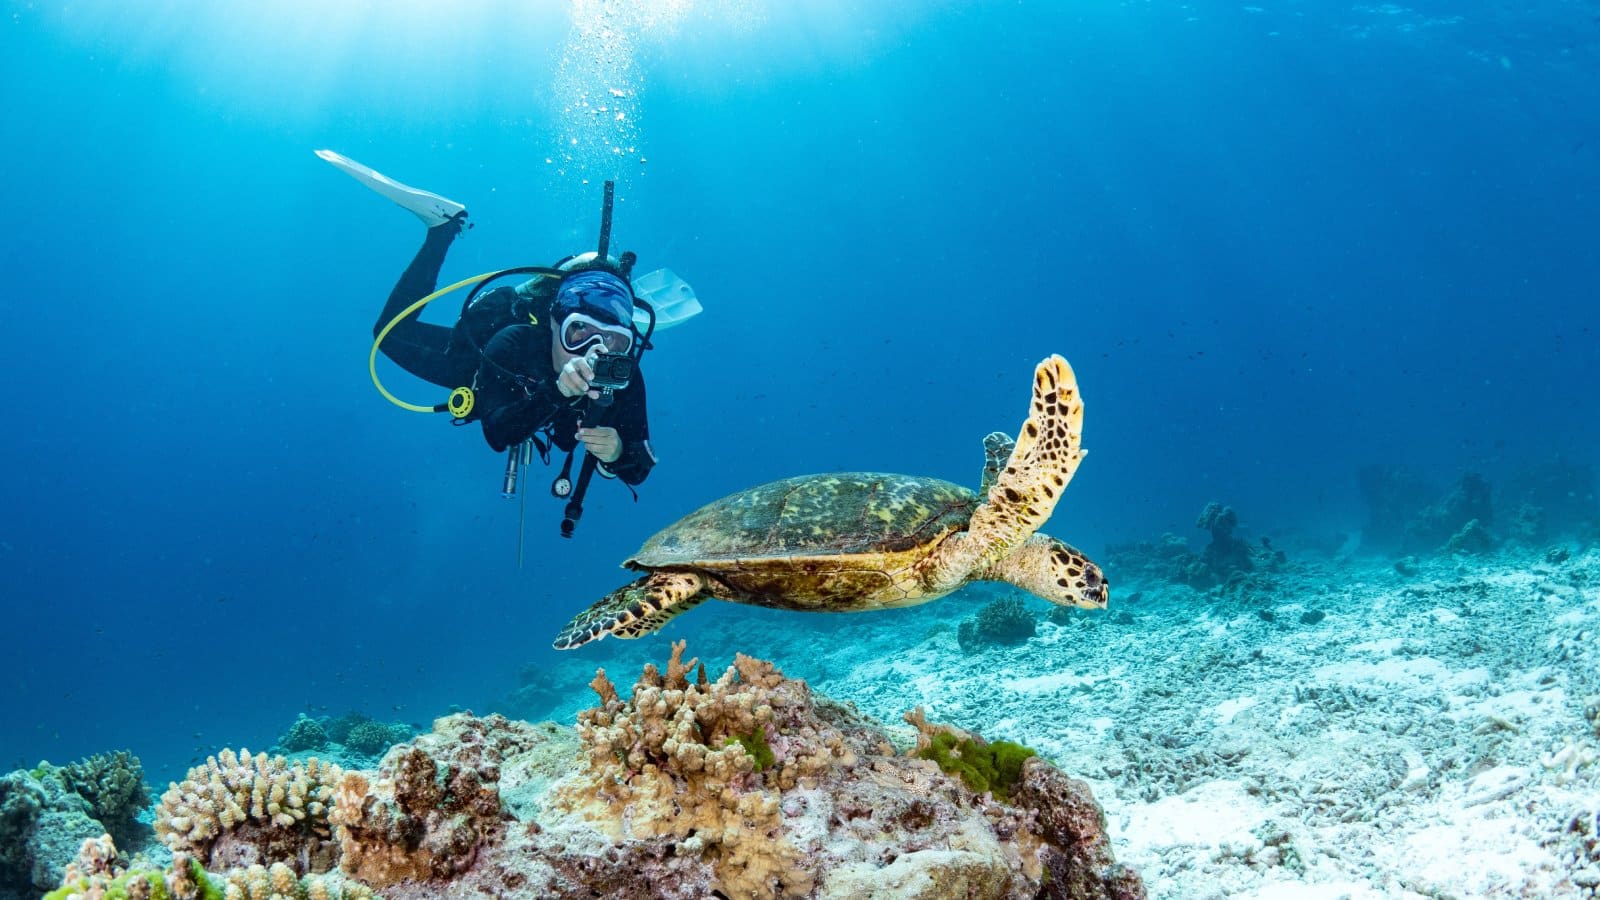 <p class="wp-caption-text">Image Credit: Shutterstock / Summer Paradive</p>  <p><span>Capturing the beauty of the underwater world through photography is a rewarding but challenging. It requires knowledge of underwater camera settings, lighting techniques, and composition to produce stunning images that convey the essence of your dive experiences.</span></p> <p><b>Insider’s Tip:</b><span> Start with a compact underwater camera or waterproof housing for your smartphone—practice in shallow waters to hone your skills before tackling more ambitious shots.</span></p>